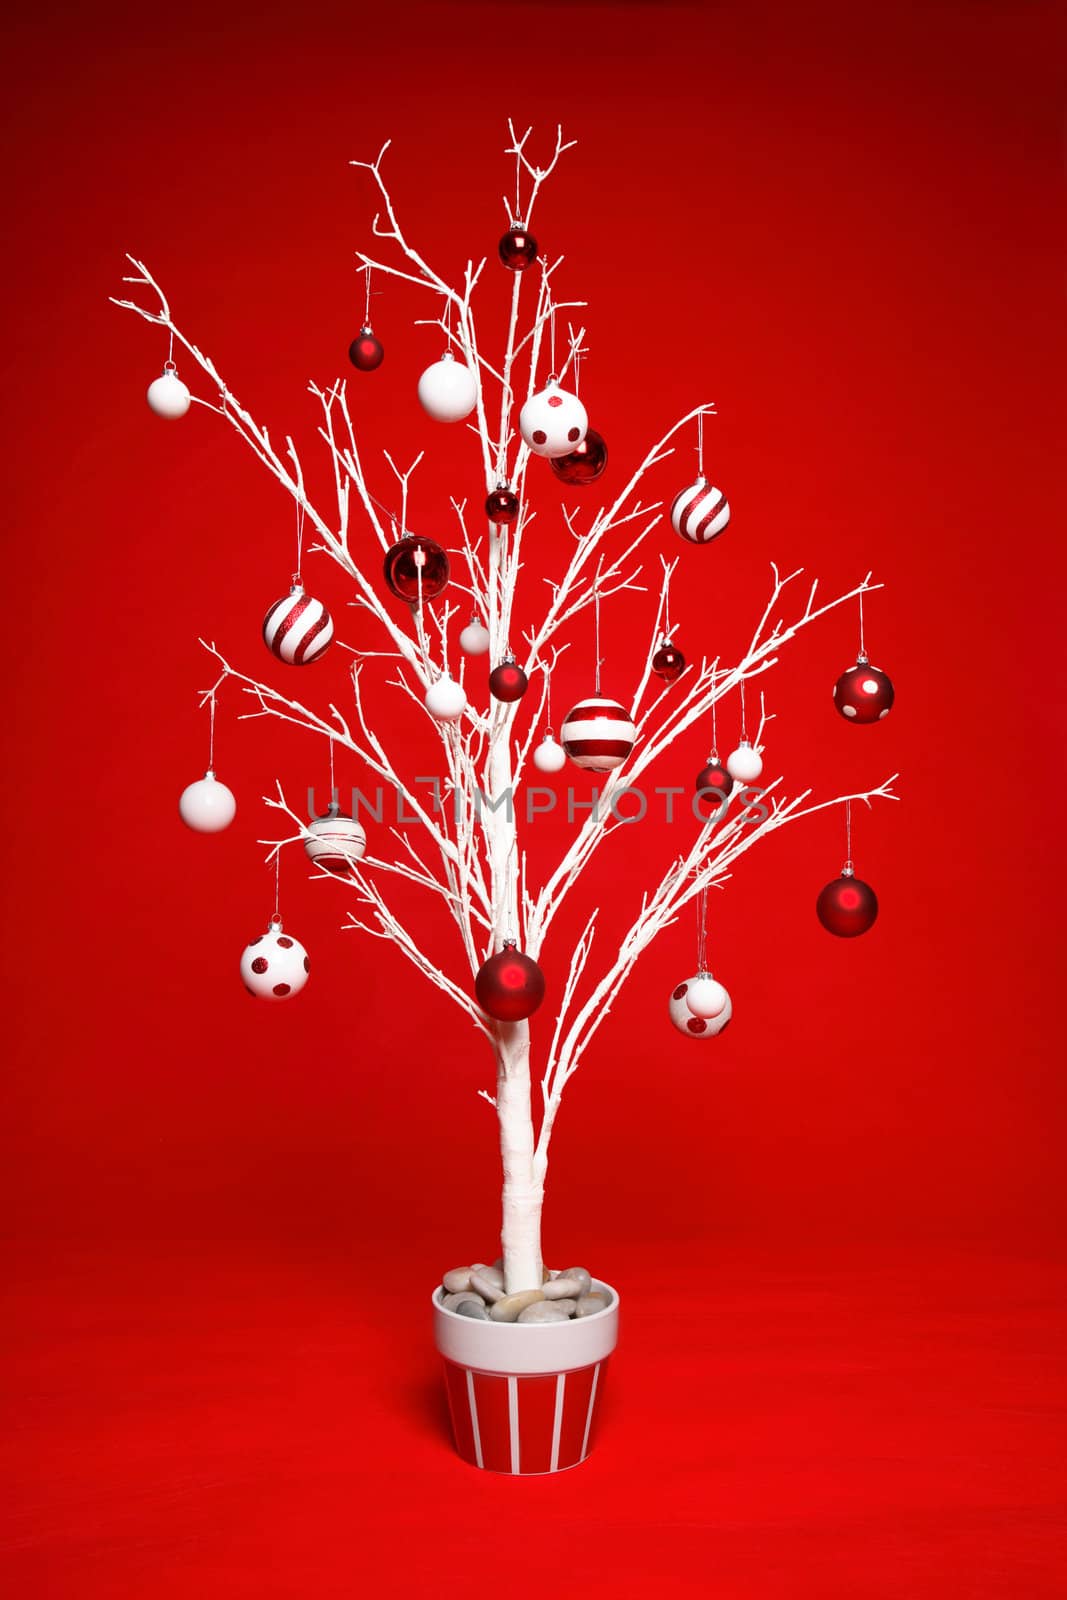 White modern Christmas tree decorated with various red and white themed christmas baubles (balls) on a red background.